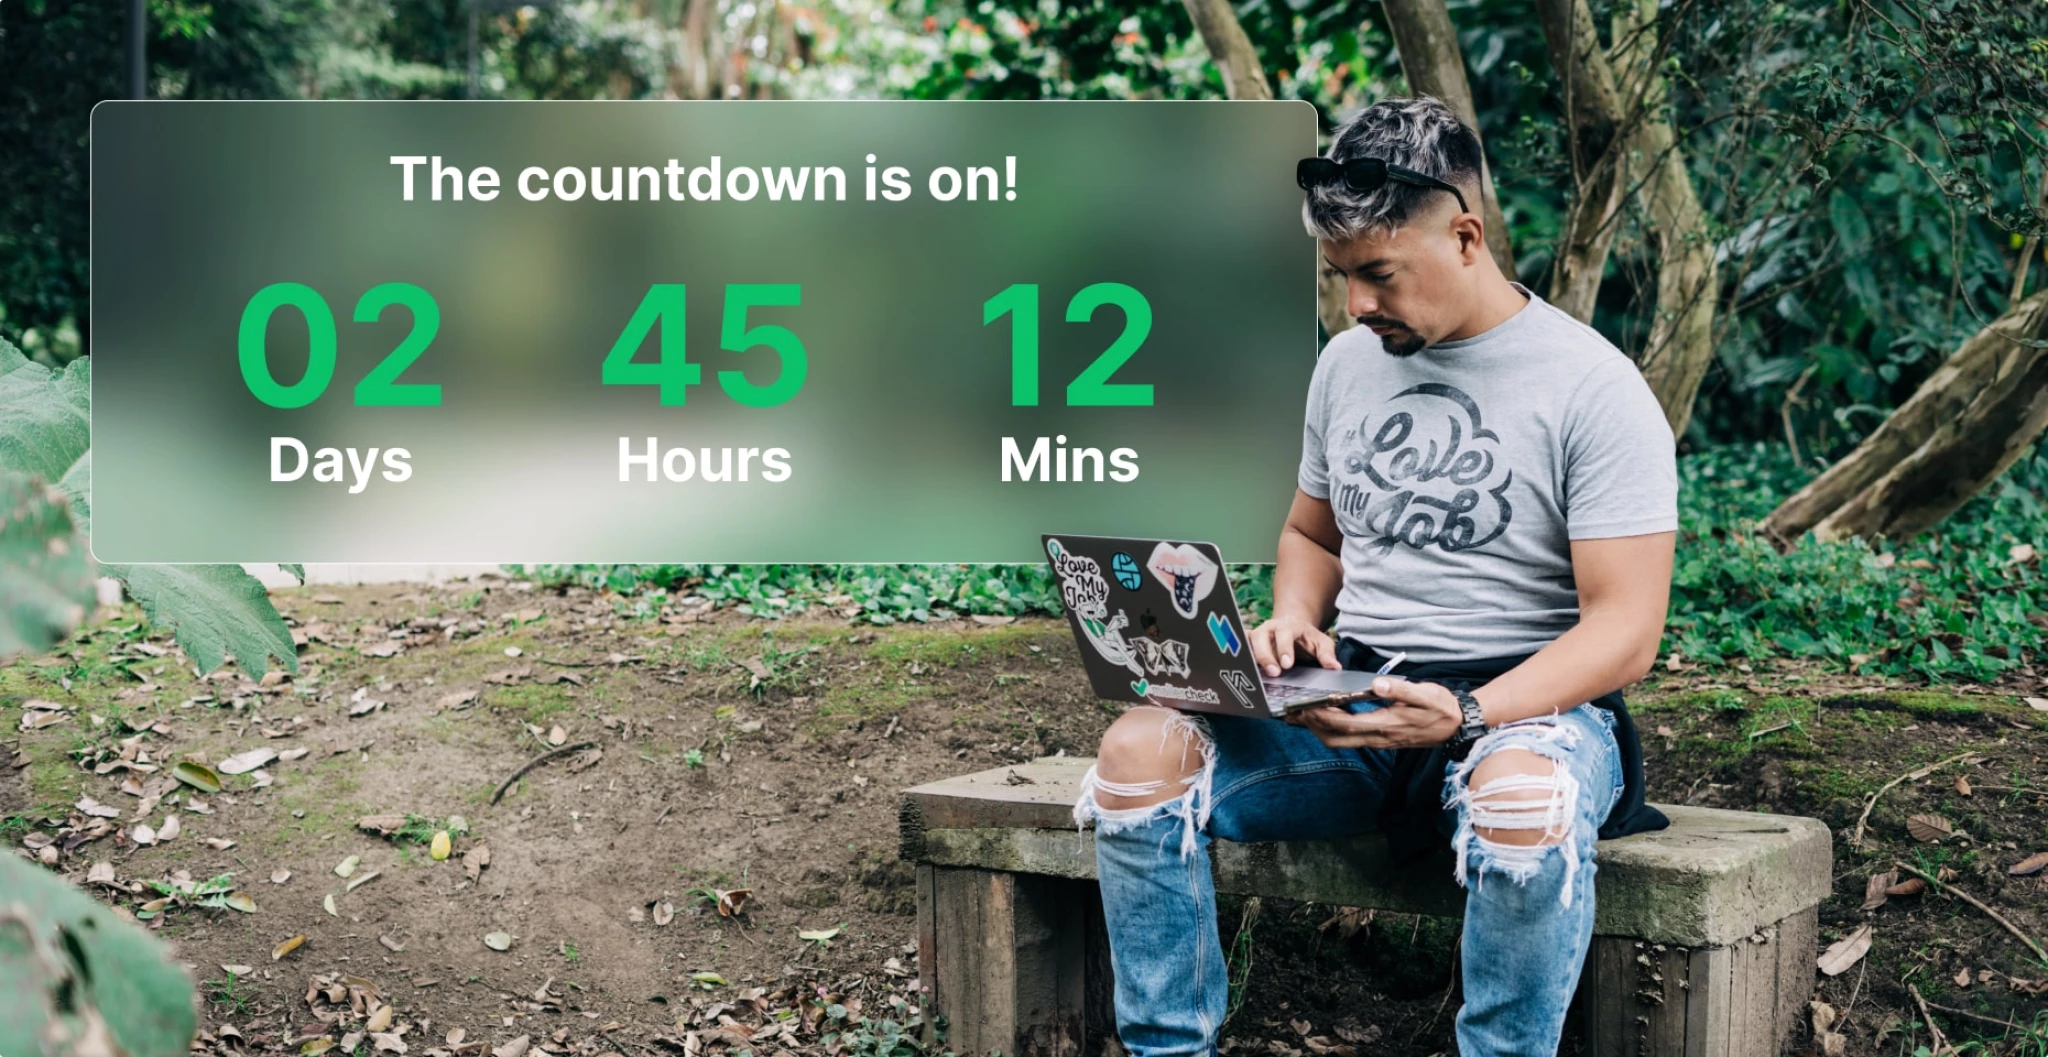 Test Drive: 5 Email Countdown Timer Tools